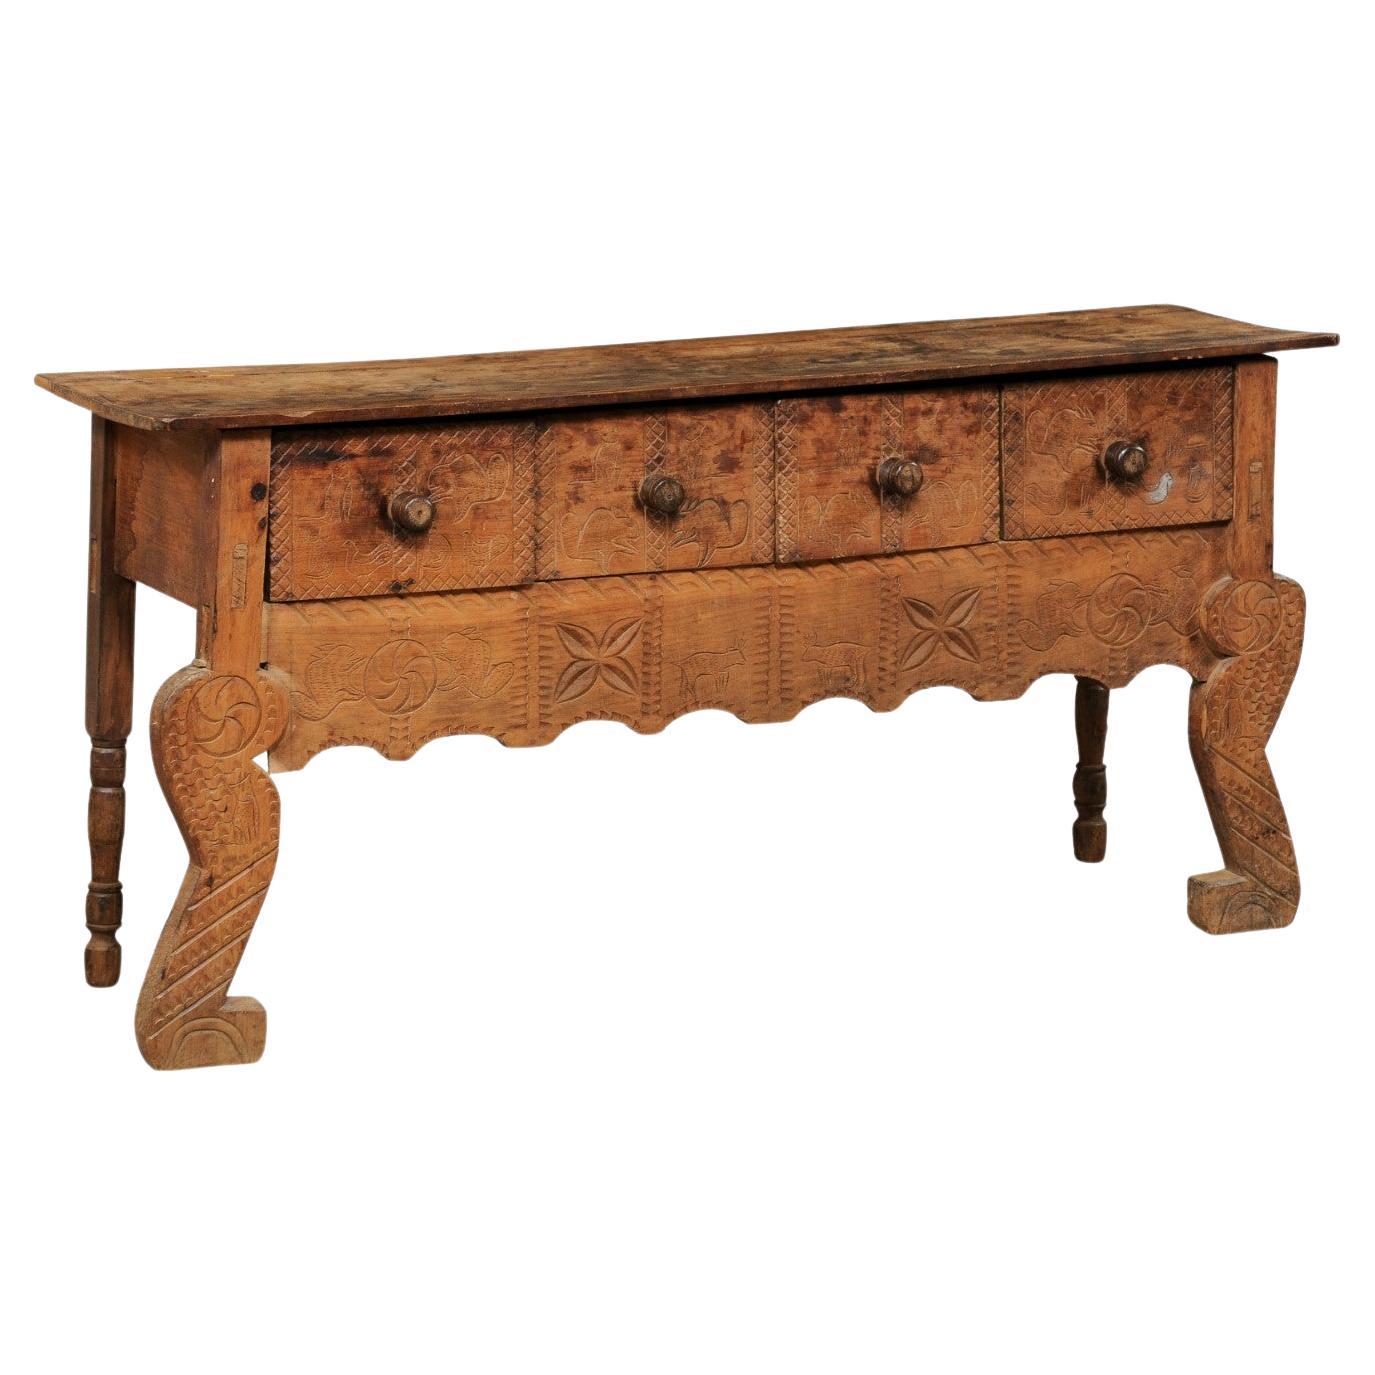 Antique Spanish Colonial Console w/Drawers, Adorn in Primitive-Style Carvings